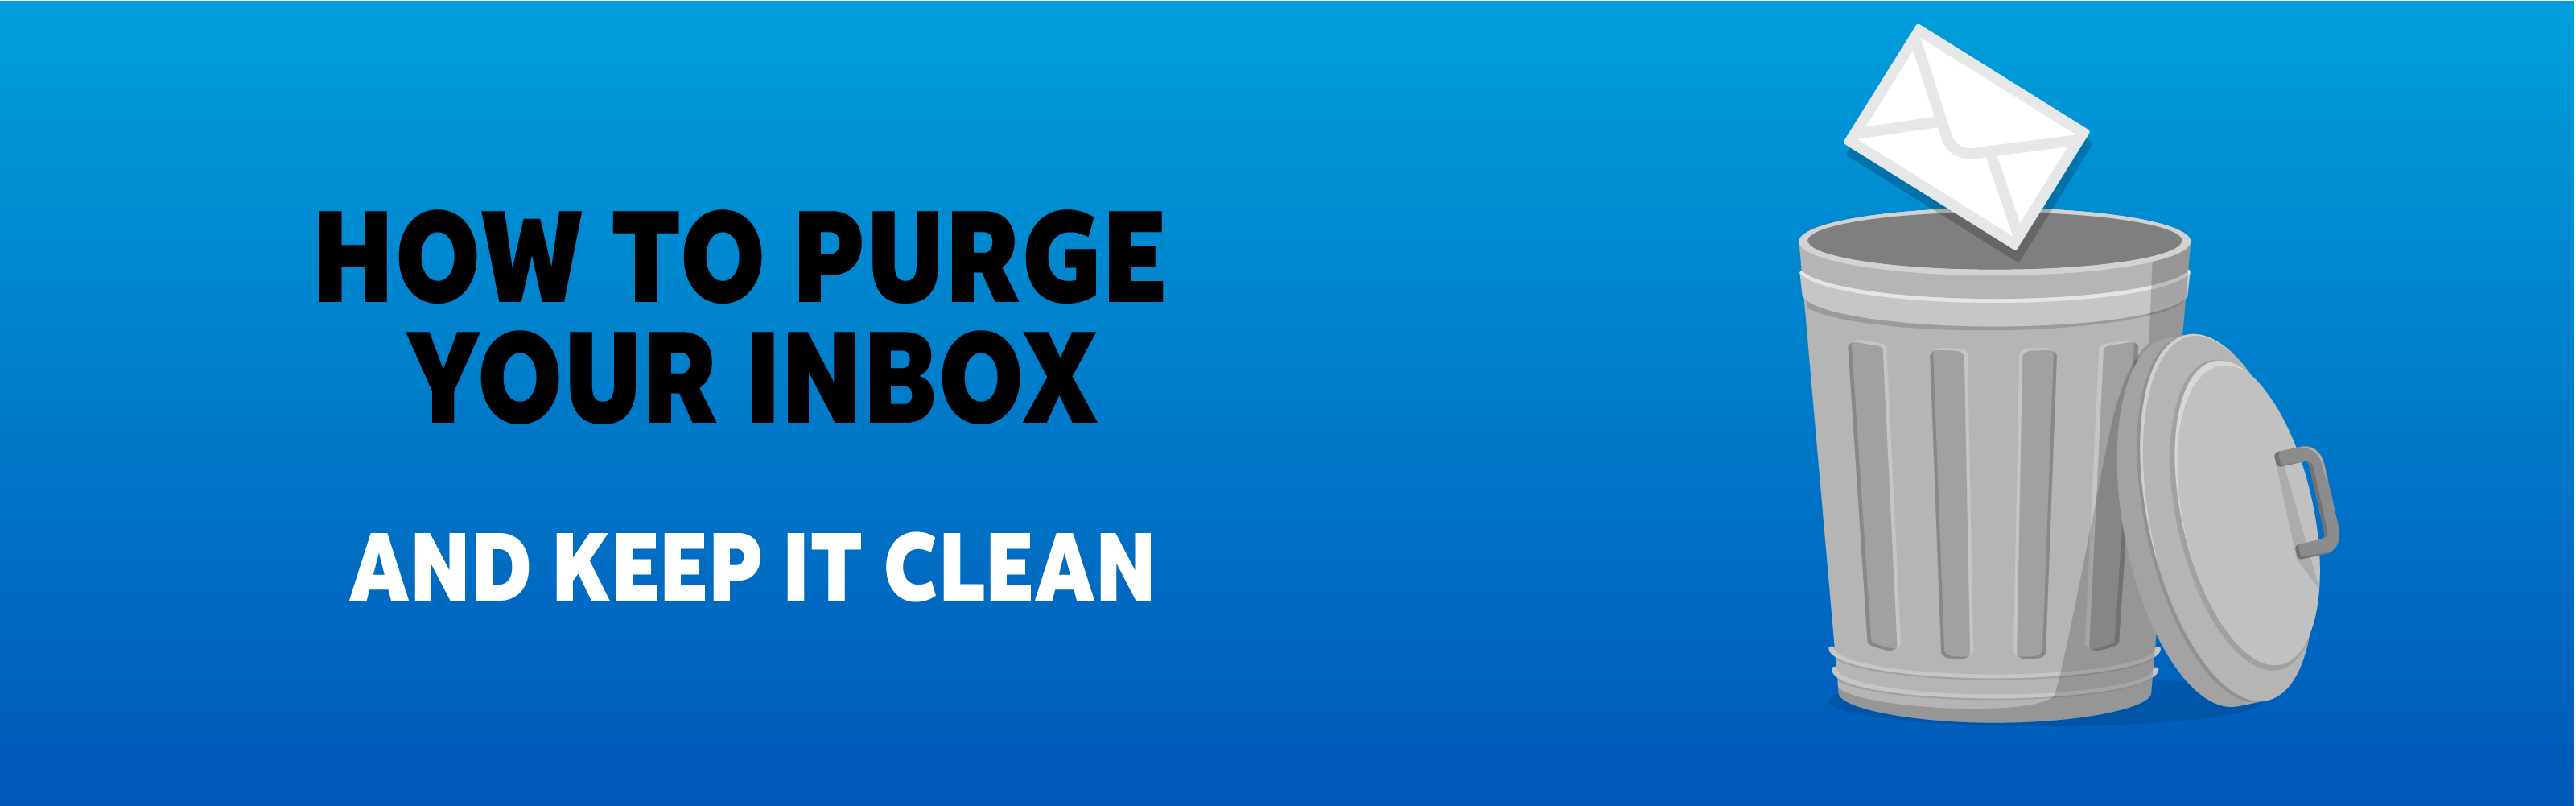 How to purge your inbox and keep it clean